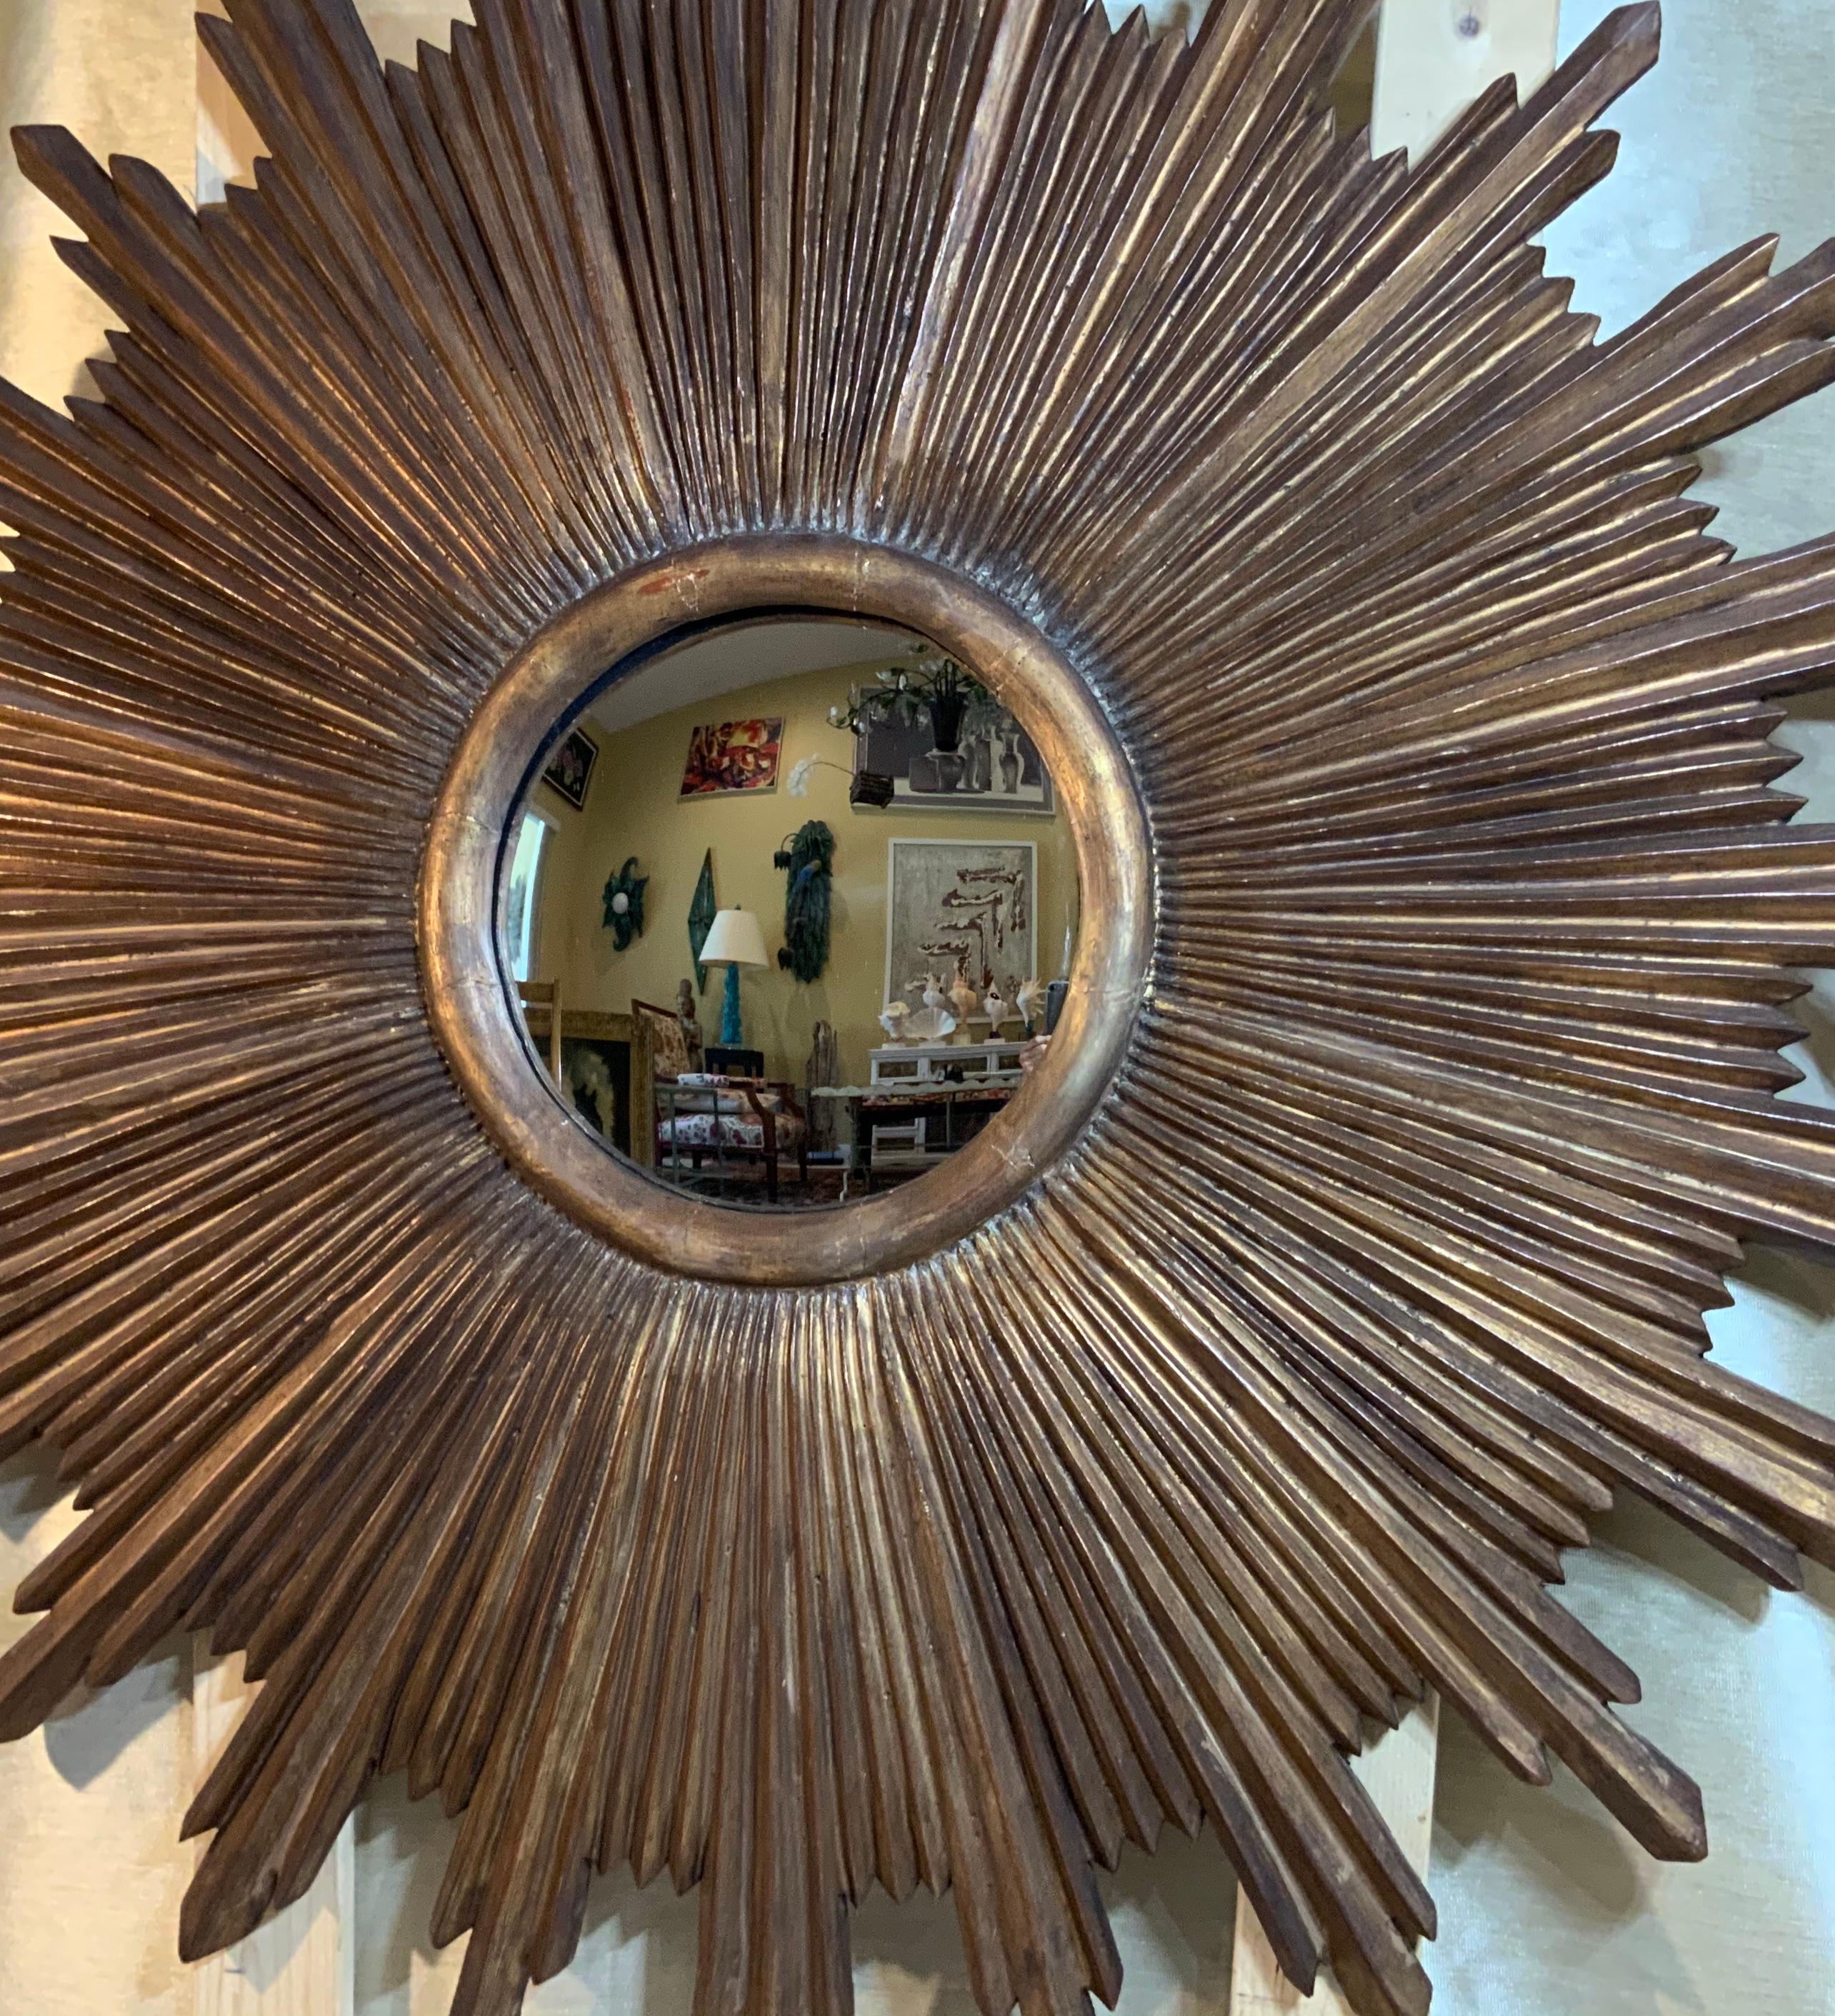 Elegant large sunburst mirror made of wood, hand painted muted gold over gesso with the original curved mirror exceptional affect when hang on the wall.
Mirror glass size only 12”.